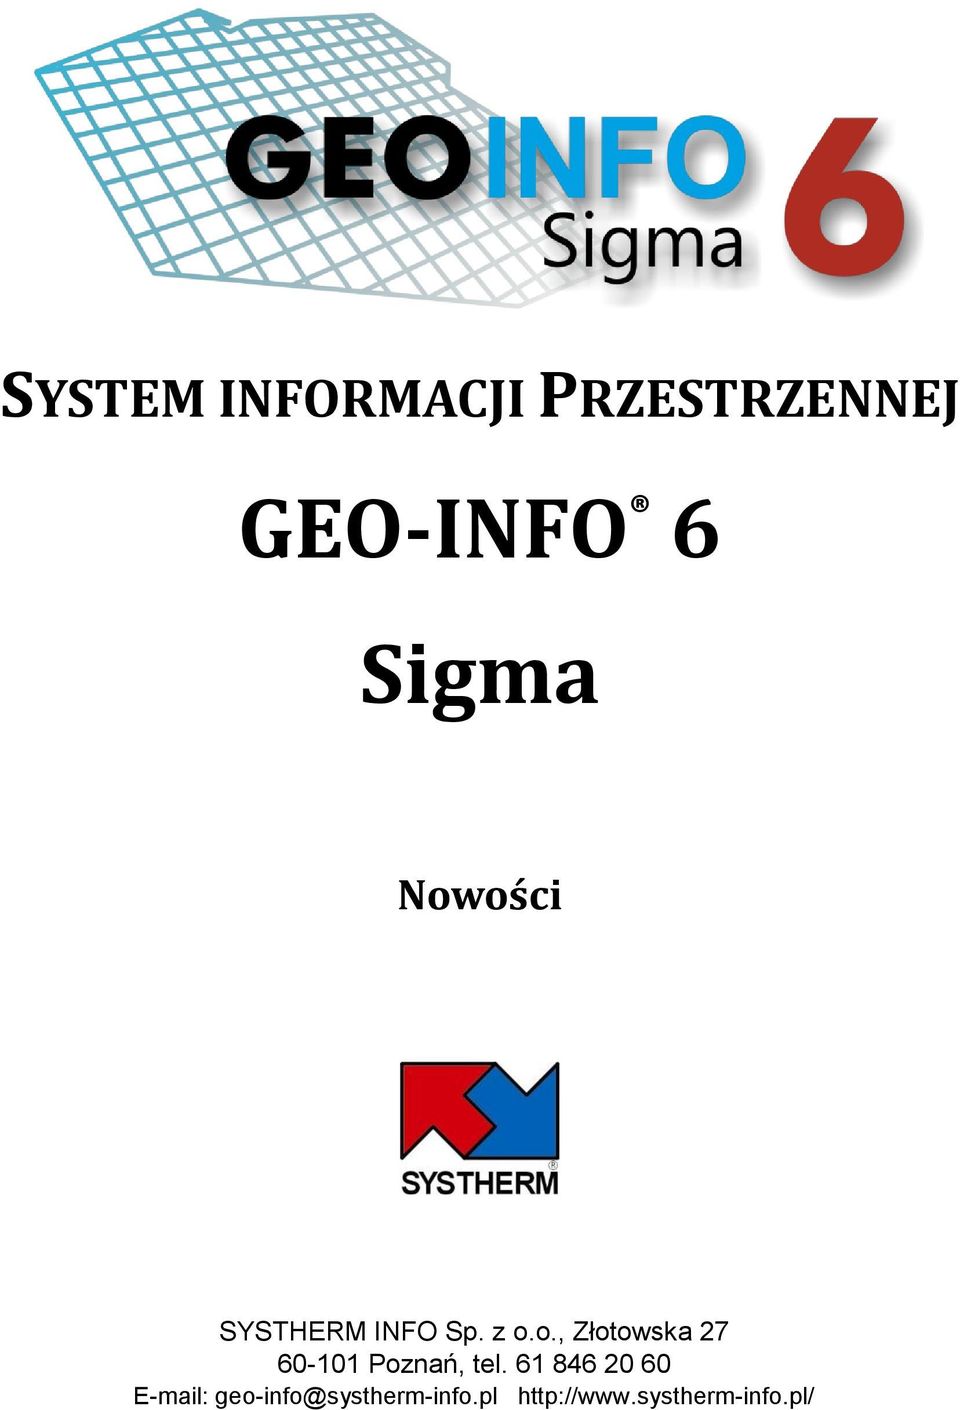 61 846 20 60 E-mail: geo-info@systherm-info.